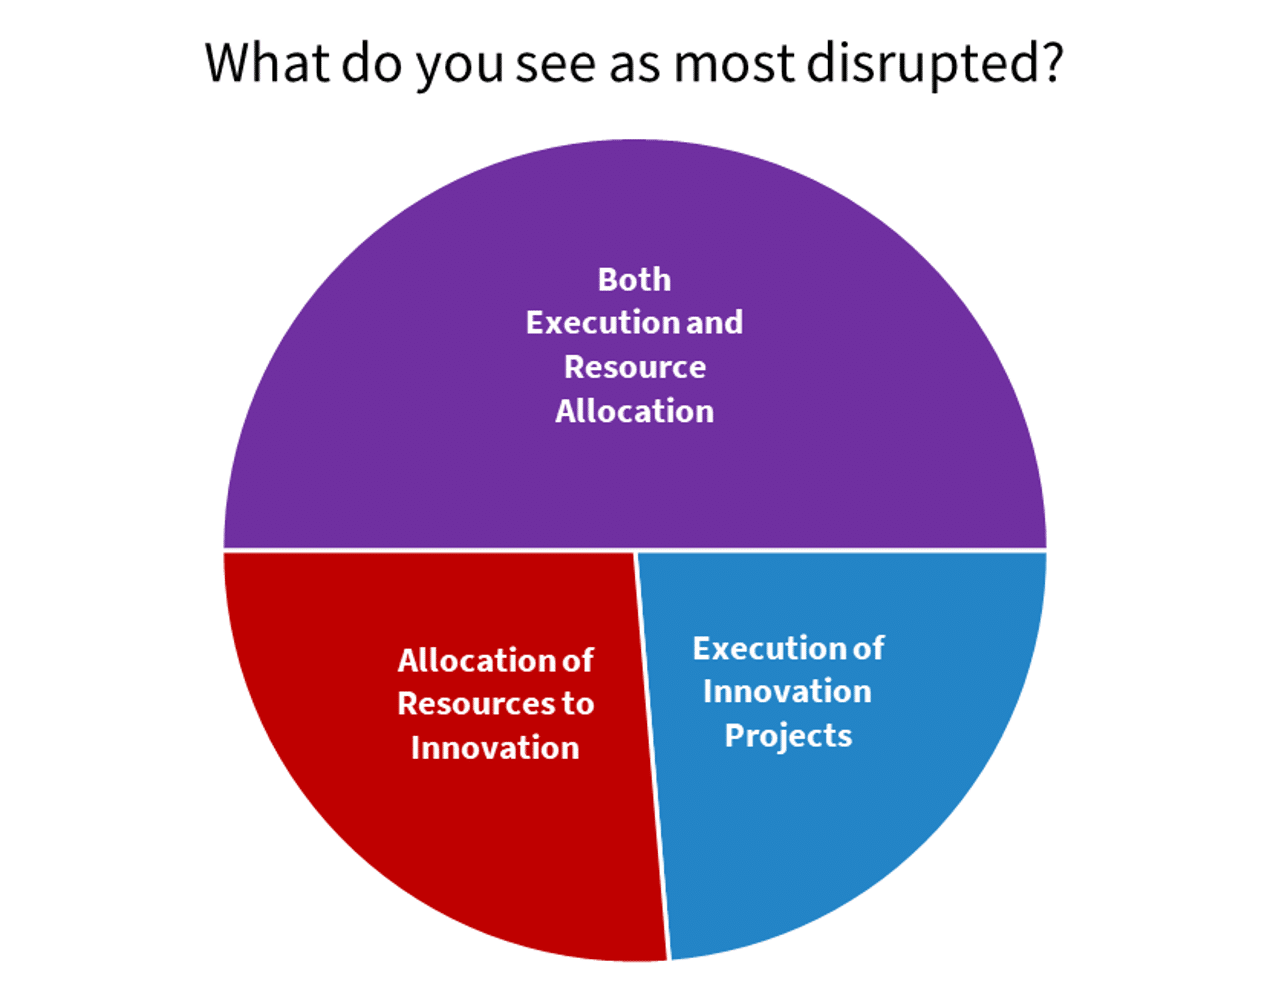 chart showing what do you see as most disrupted? Both Execution and Resource Allocation; Execution of Innovation Projects; Allocation of Resources to Innovation